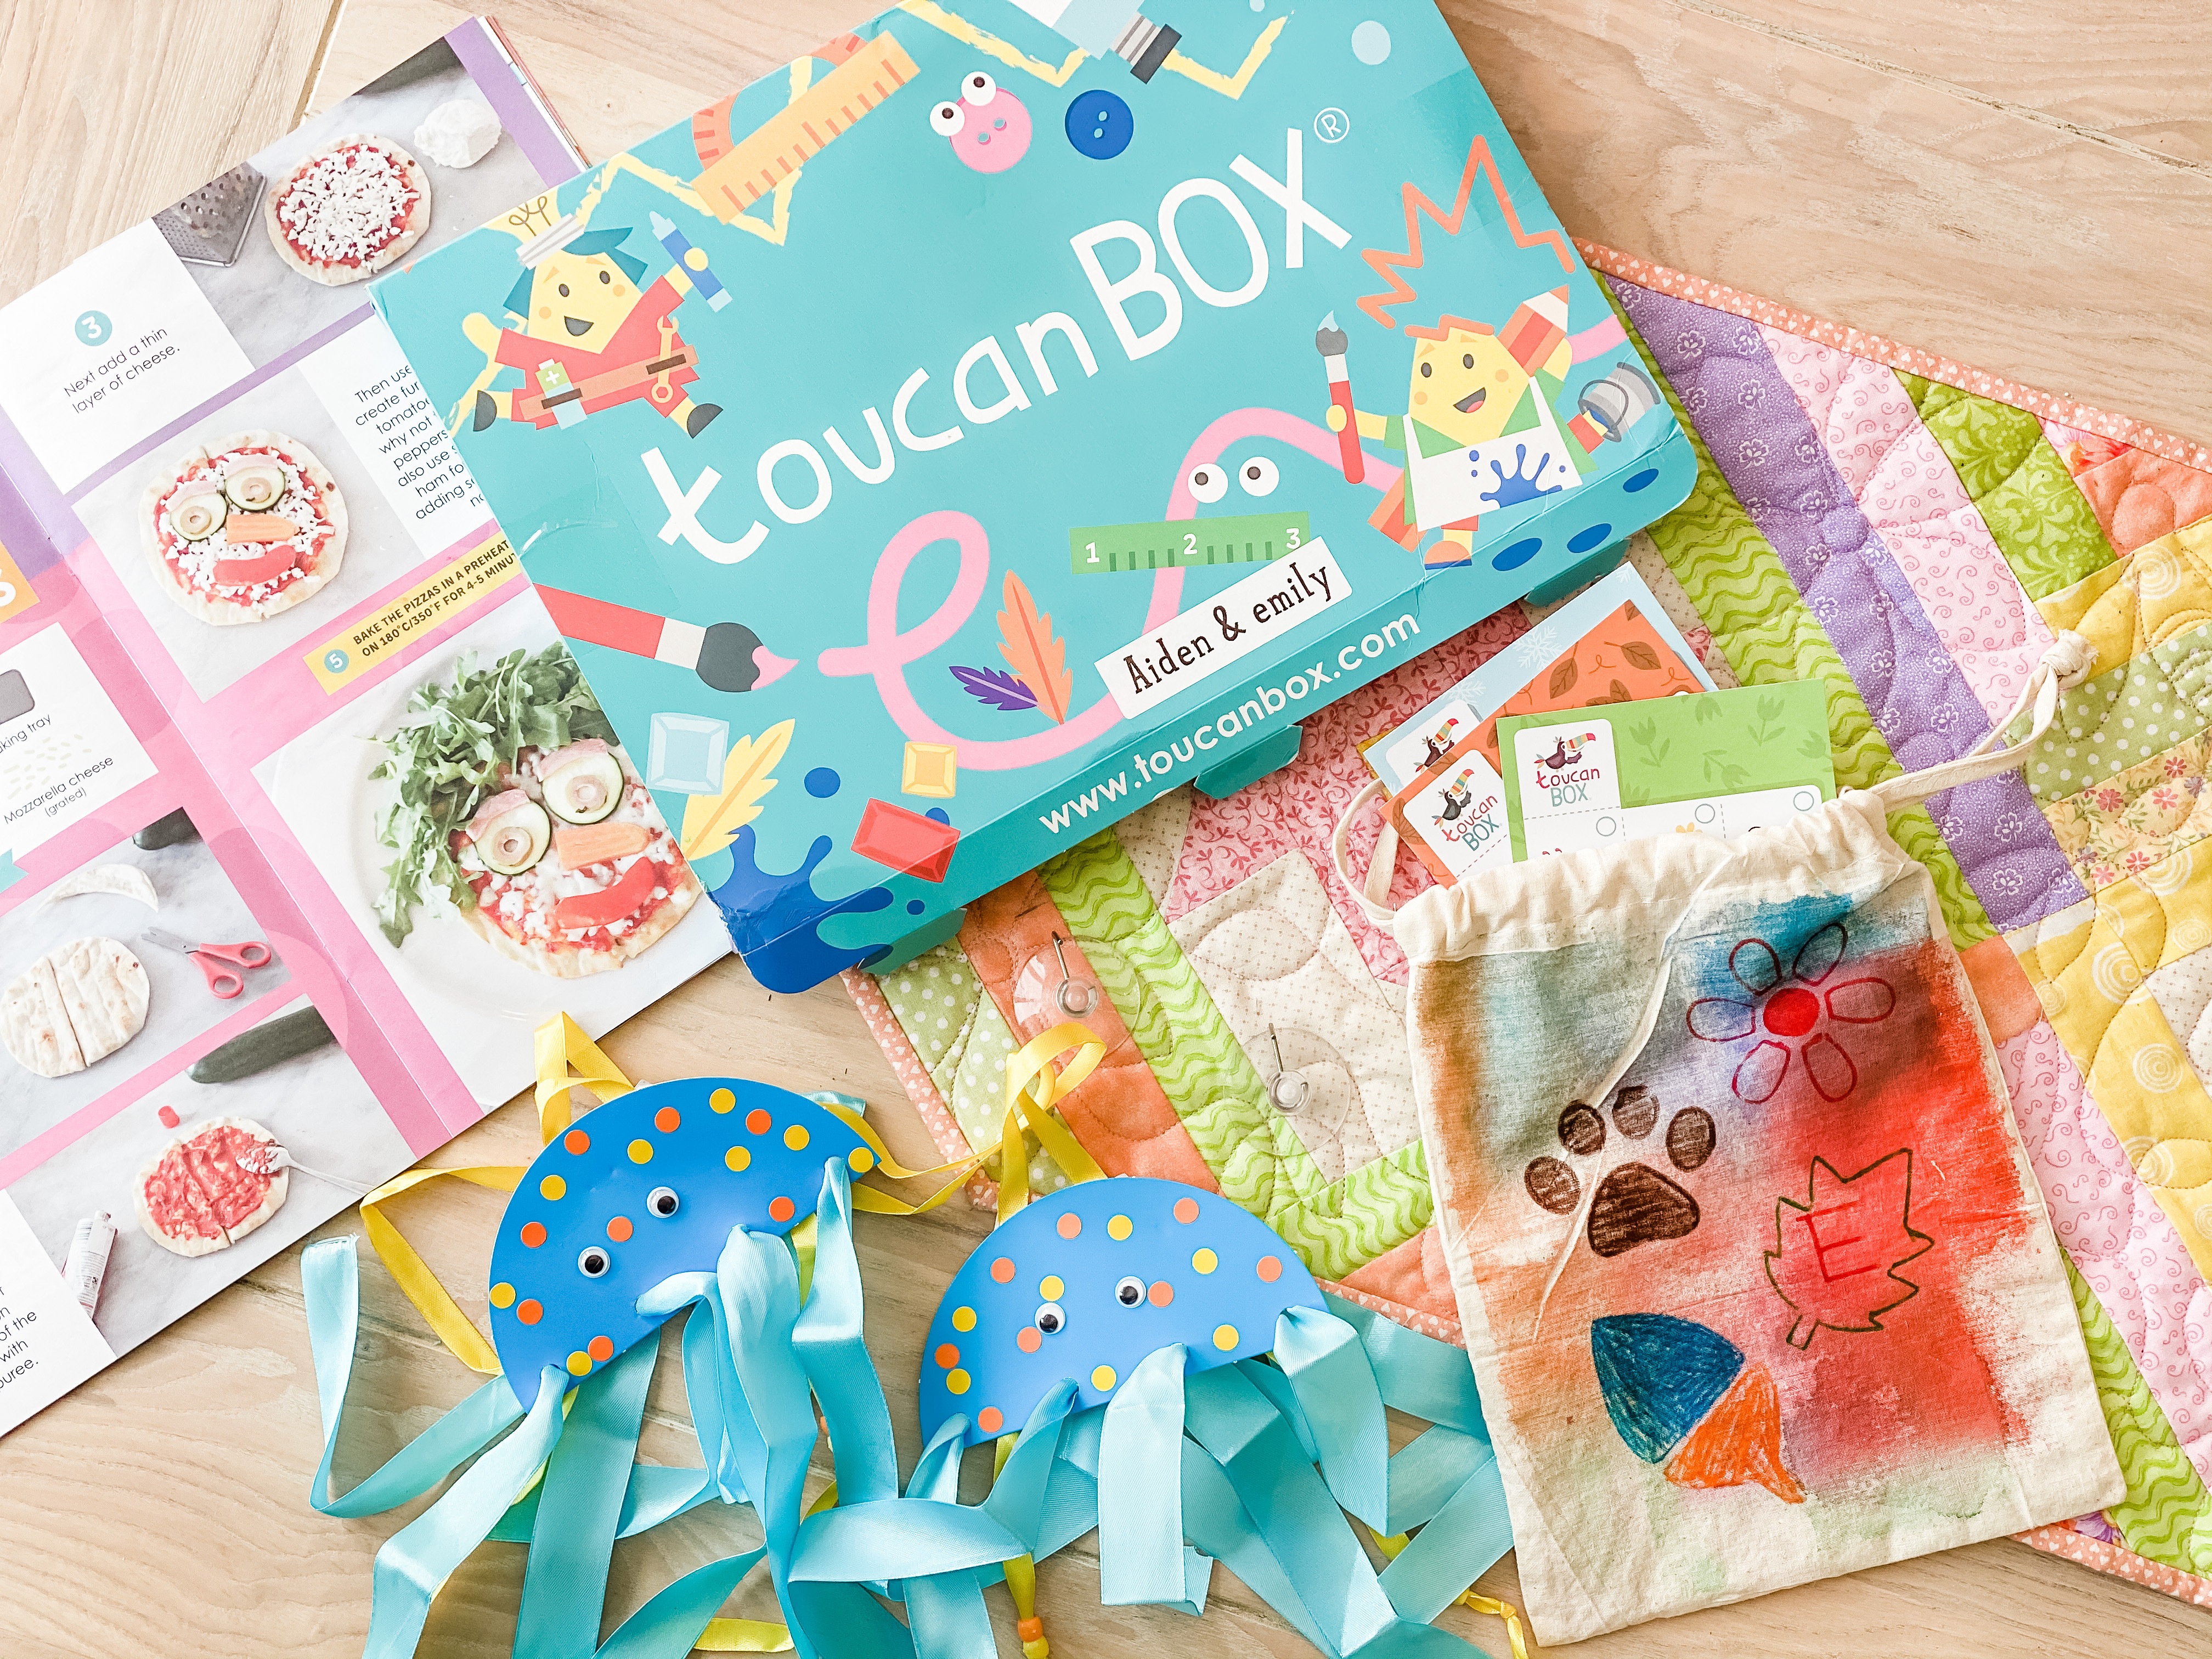 Kids Crafting & Learning with A toucanBox (discount code)